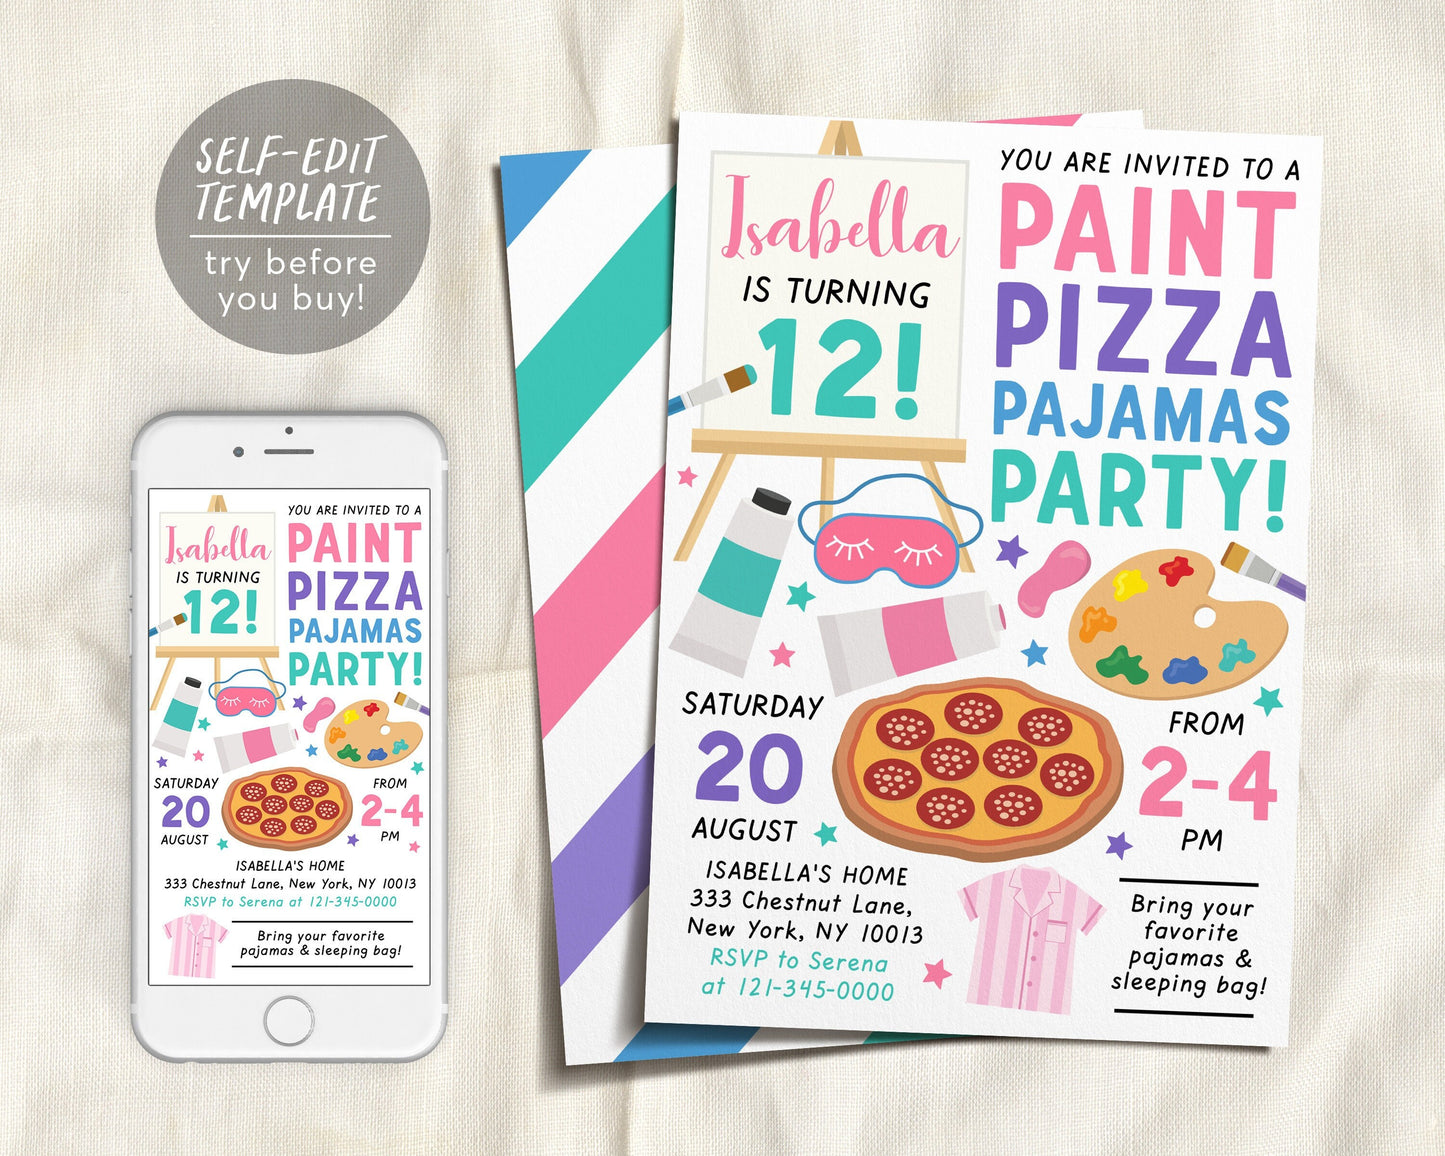 Paint Pizza and Pajamas Party Birthday Invitation Editable Template, Art Painting Party Evite, Girl Slumber Sleepover Party Dress for a Mess